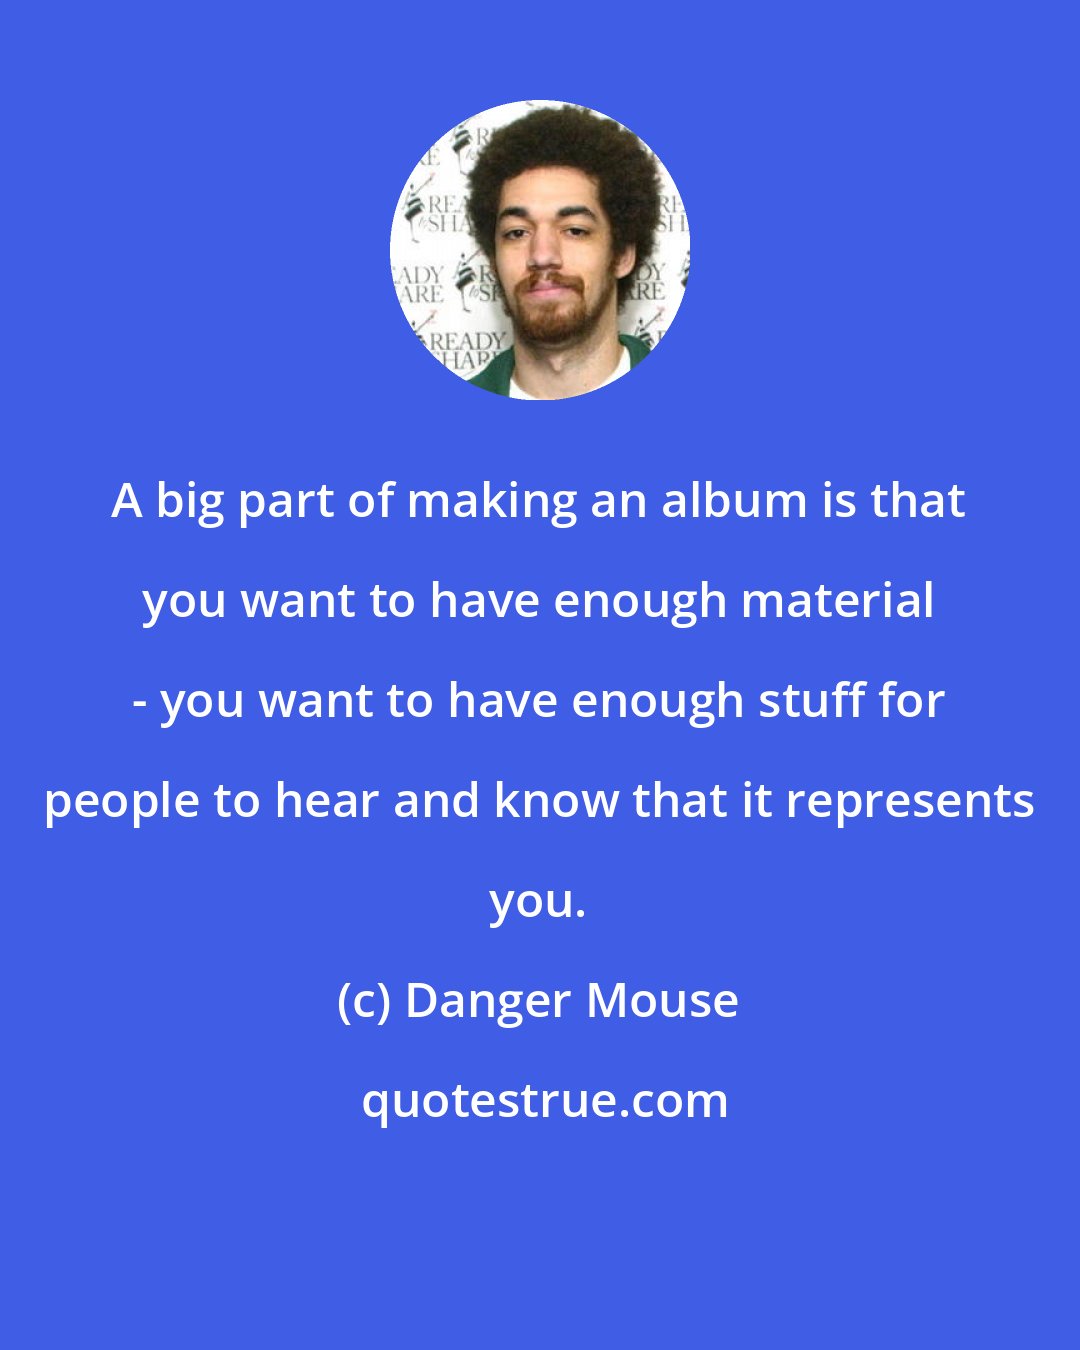 Danger Mouse: A big part of making an album is that you want to have enough material - you want to have enough stuff for people to hear and know that it represents you.